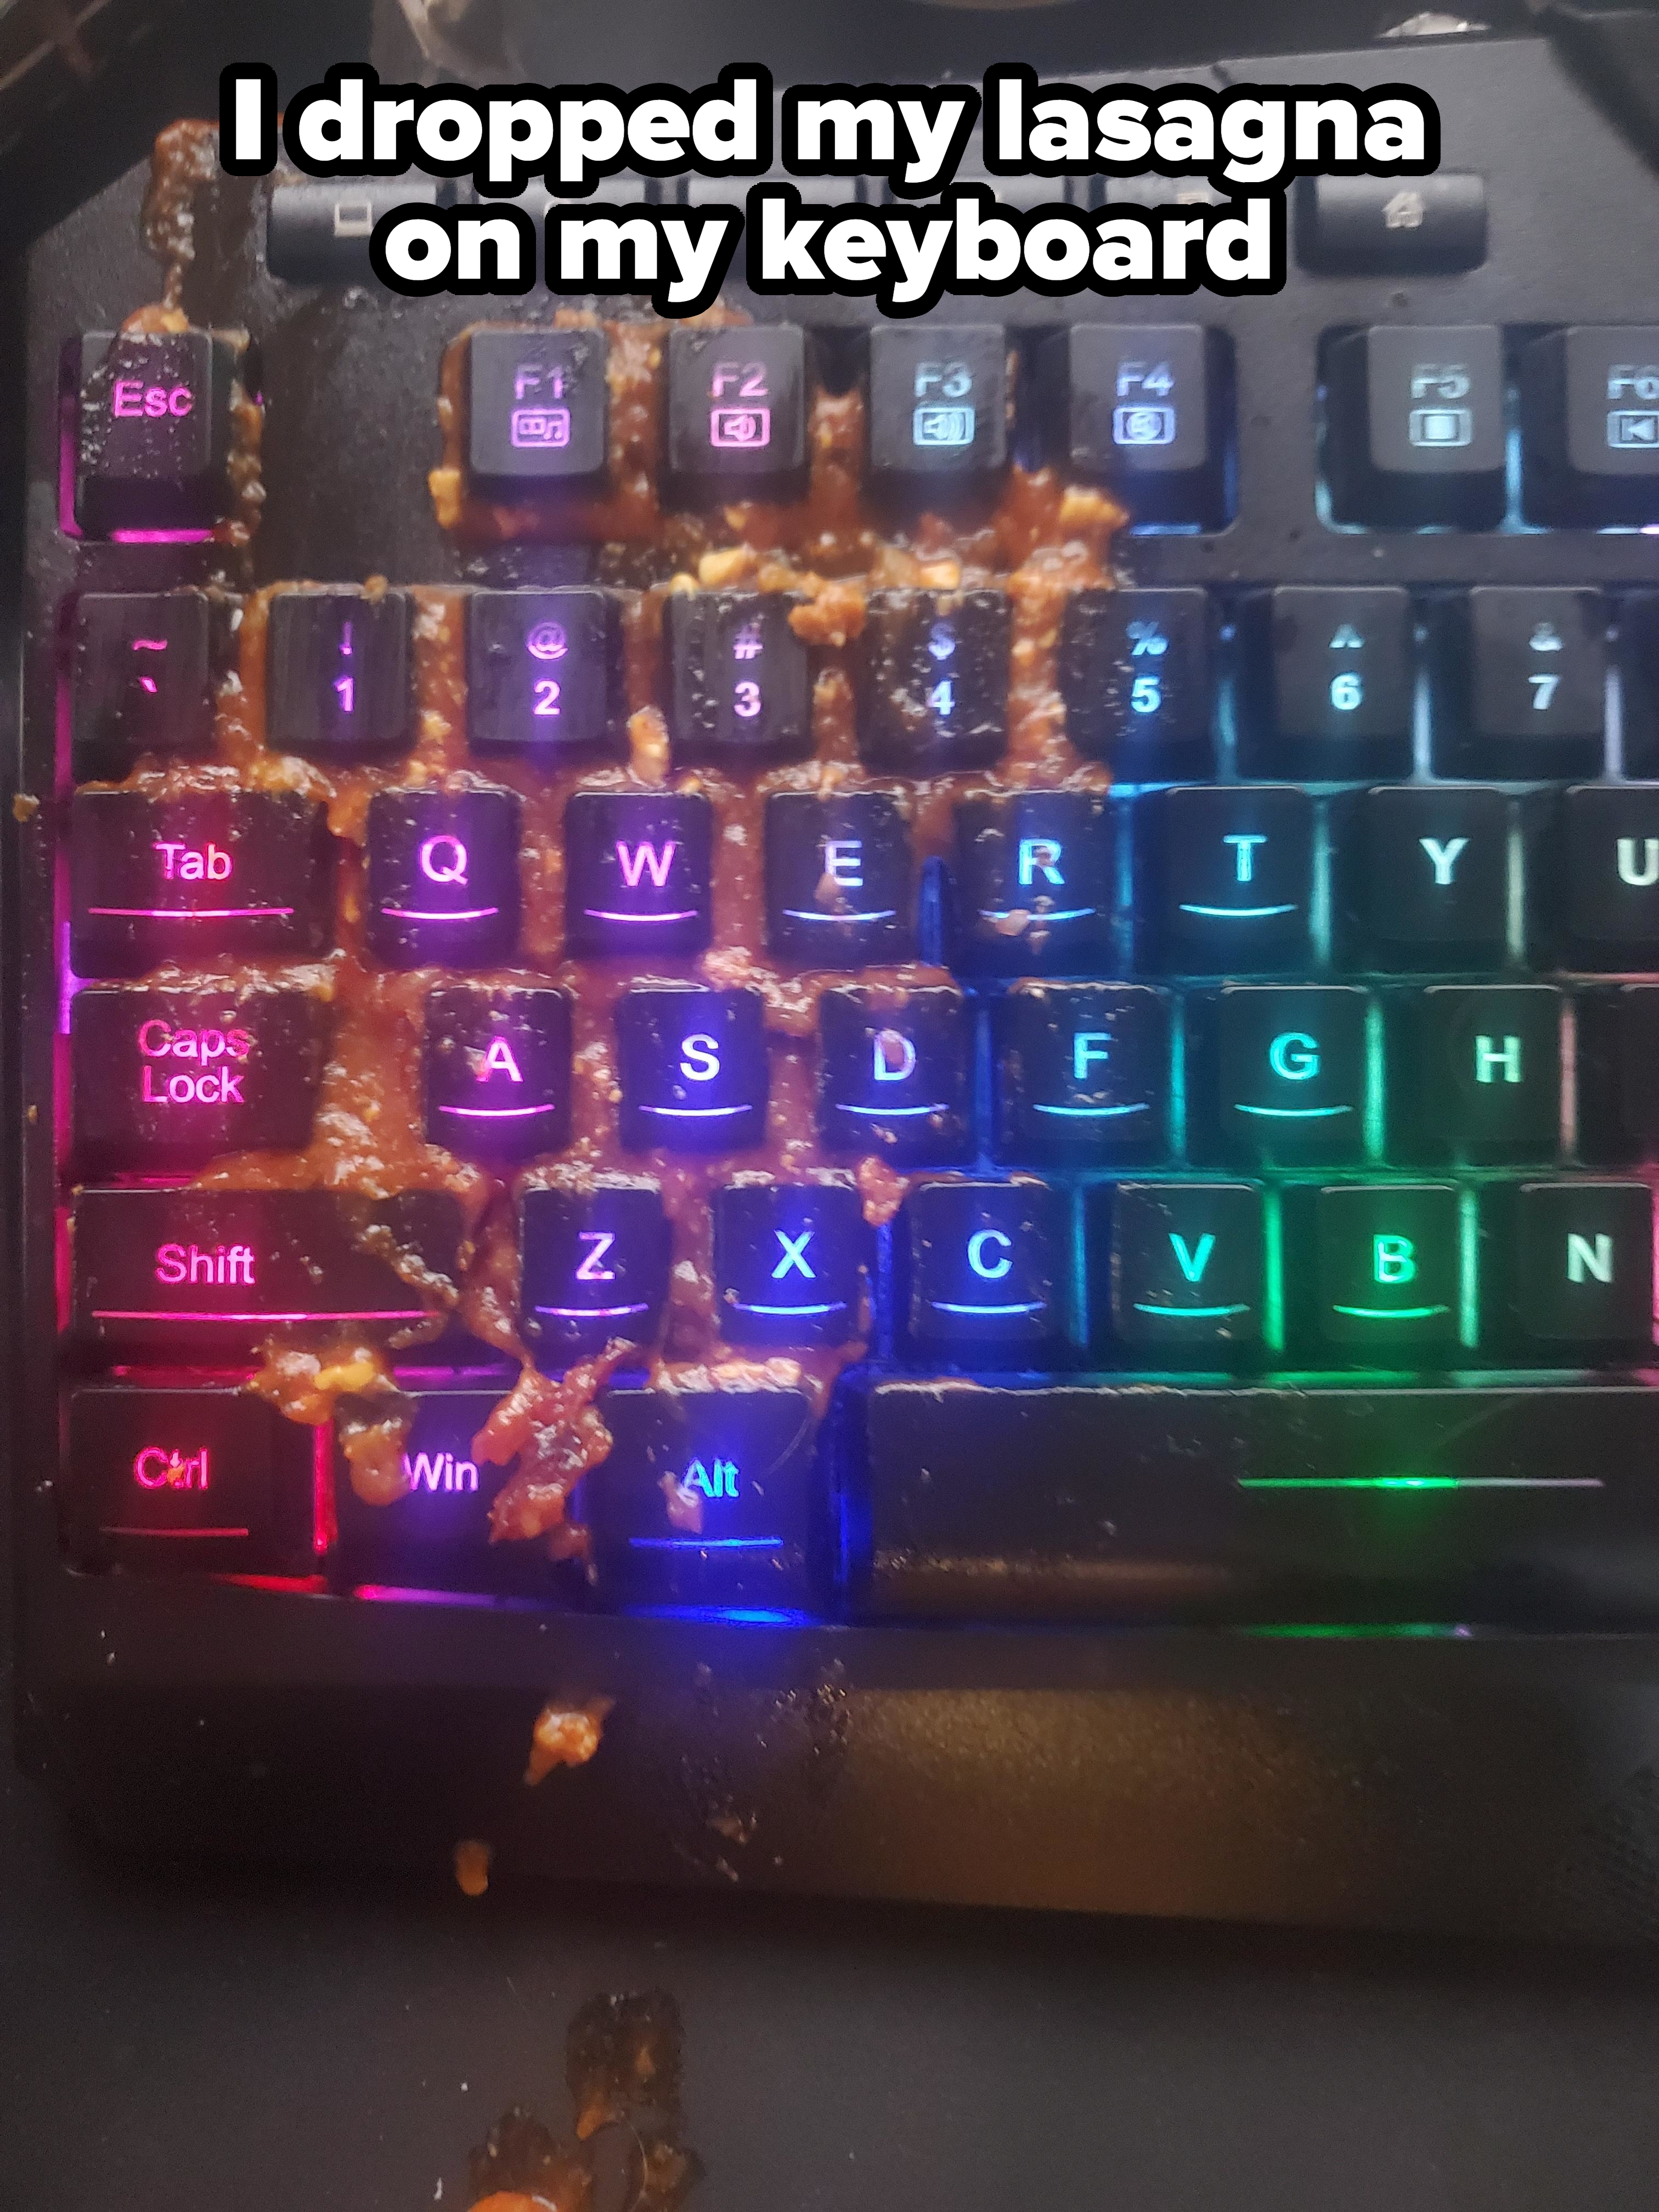 &quot;I dropped lasagne on my keyboard.&quot;